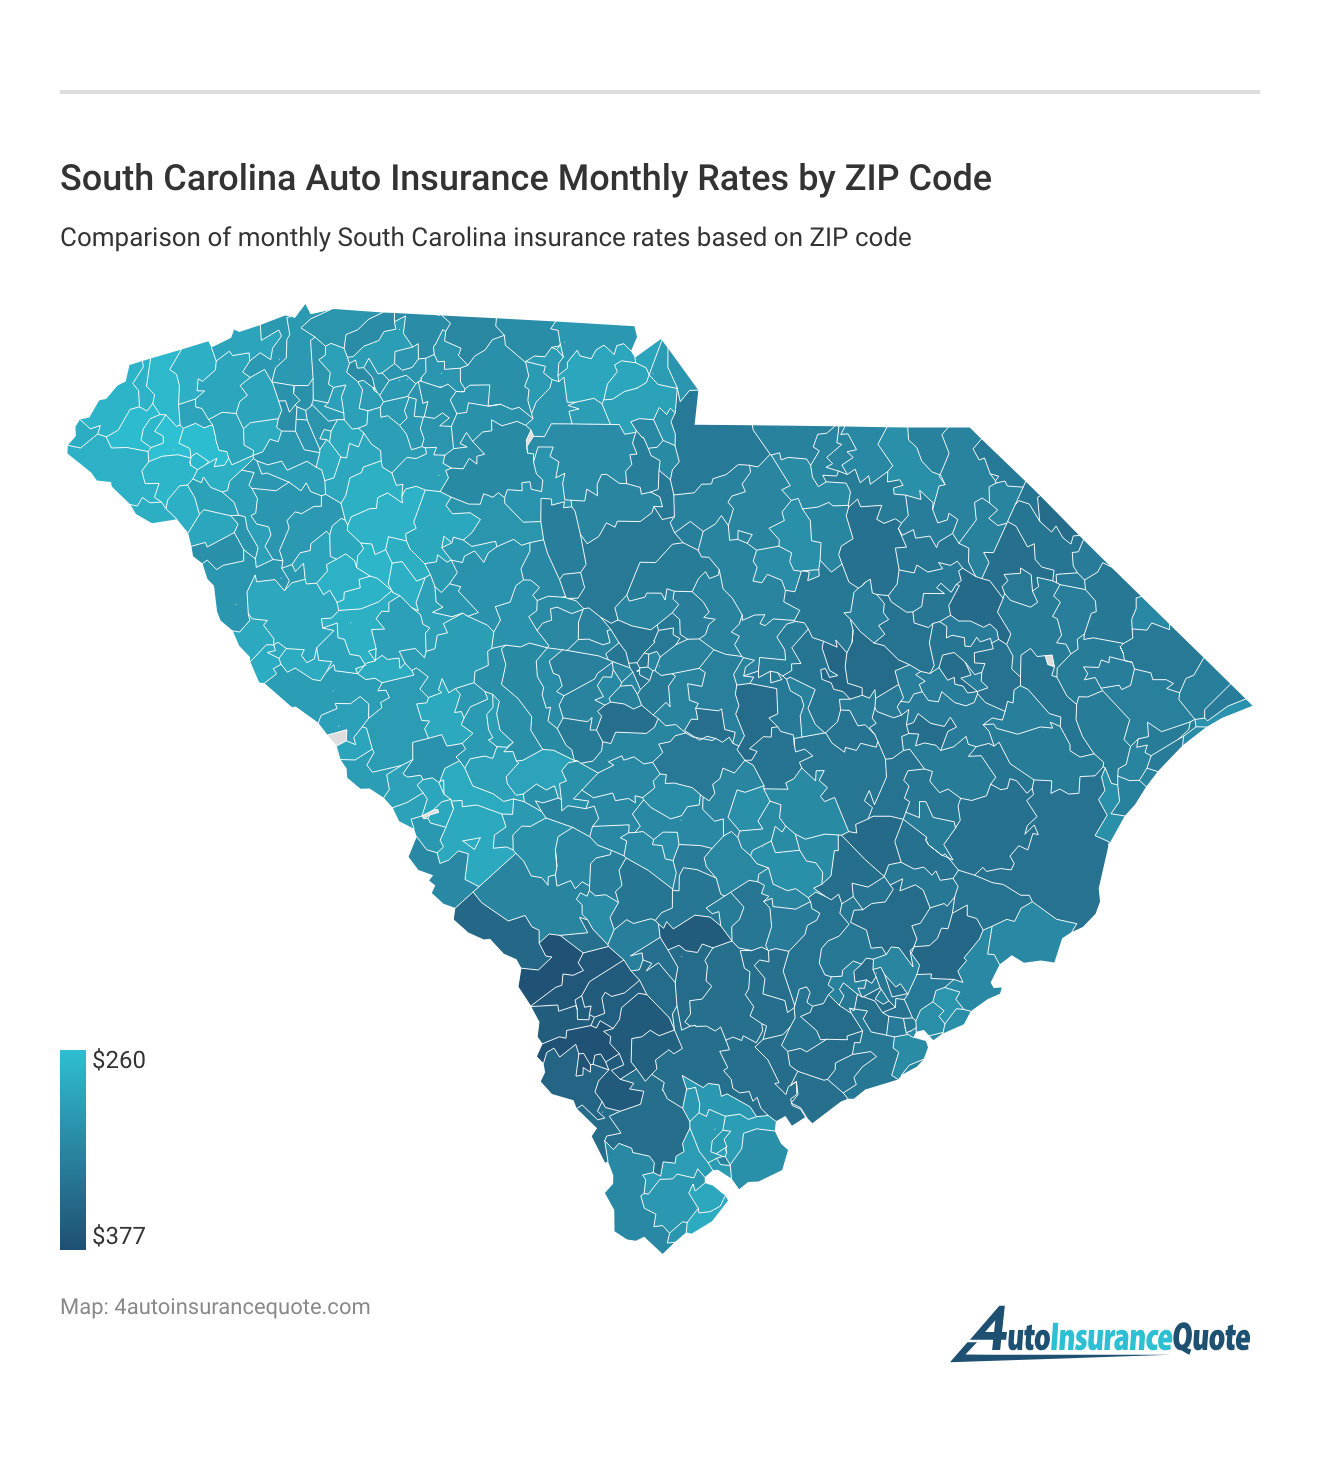 <h3>South Carolina Auto Insurance Monthly Rates by ZIP Code</h3>